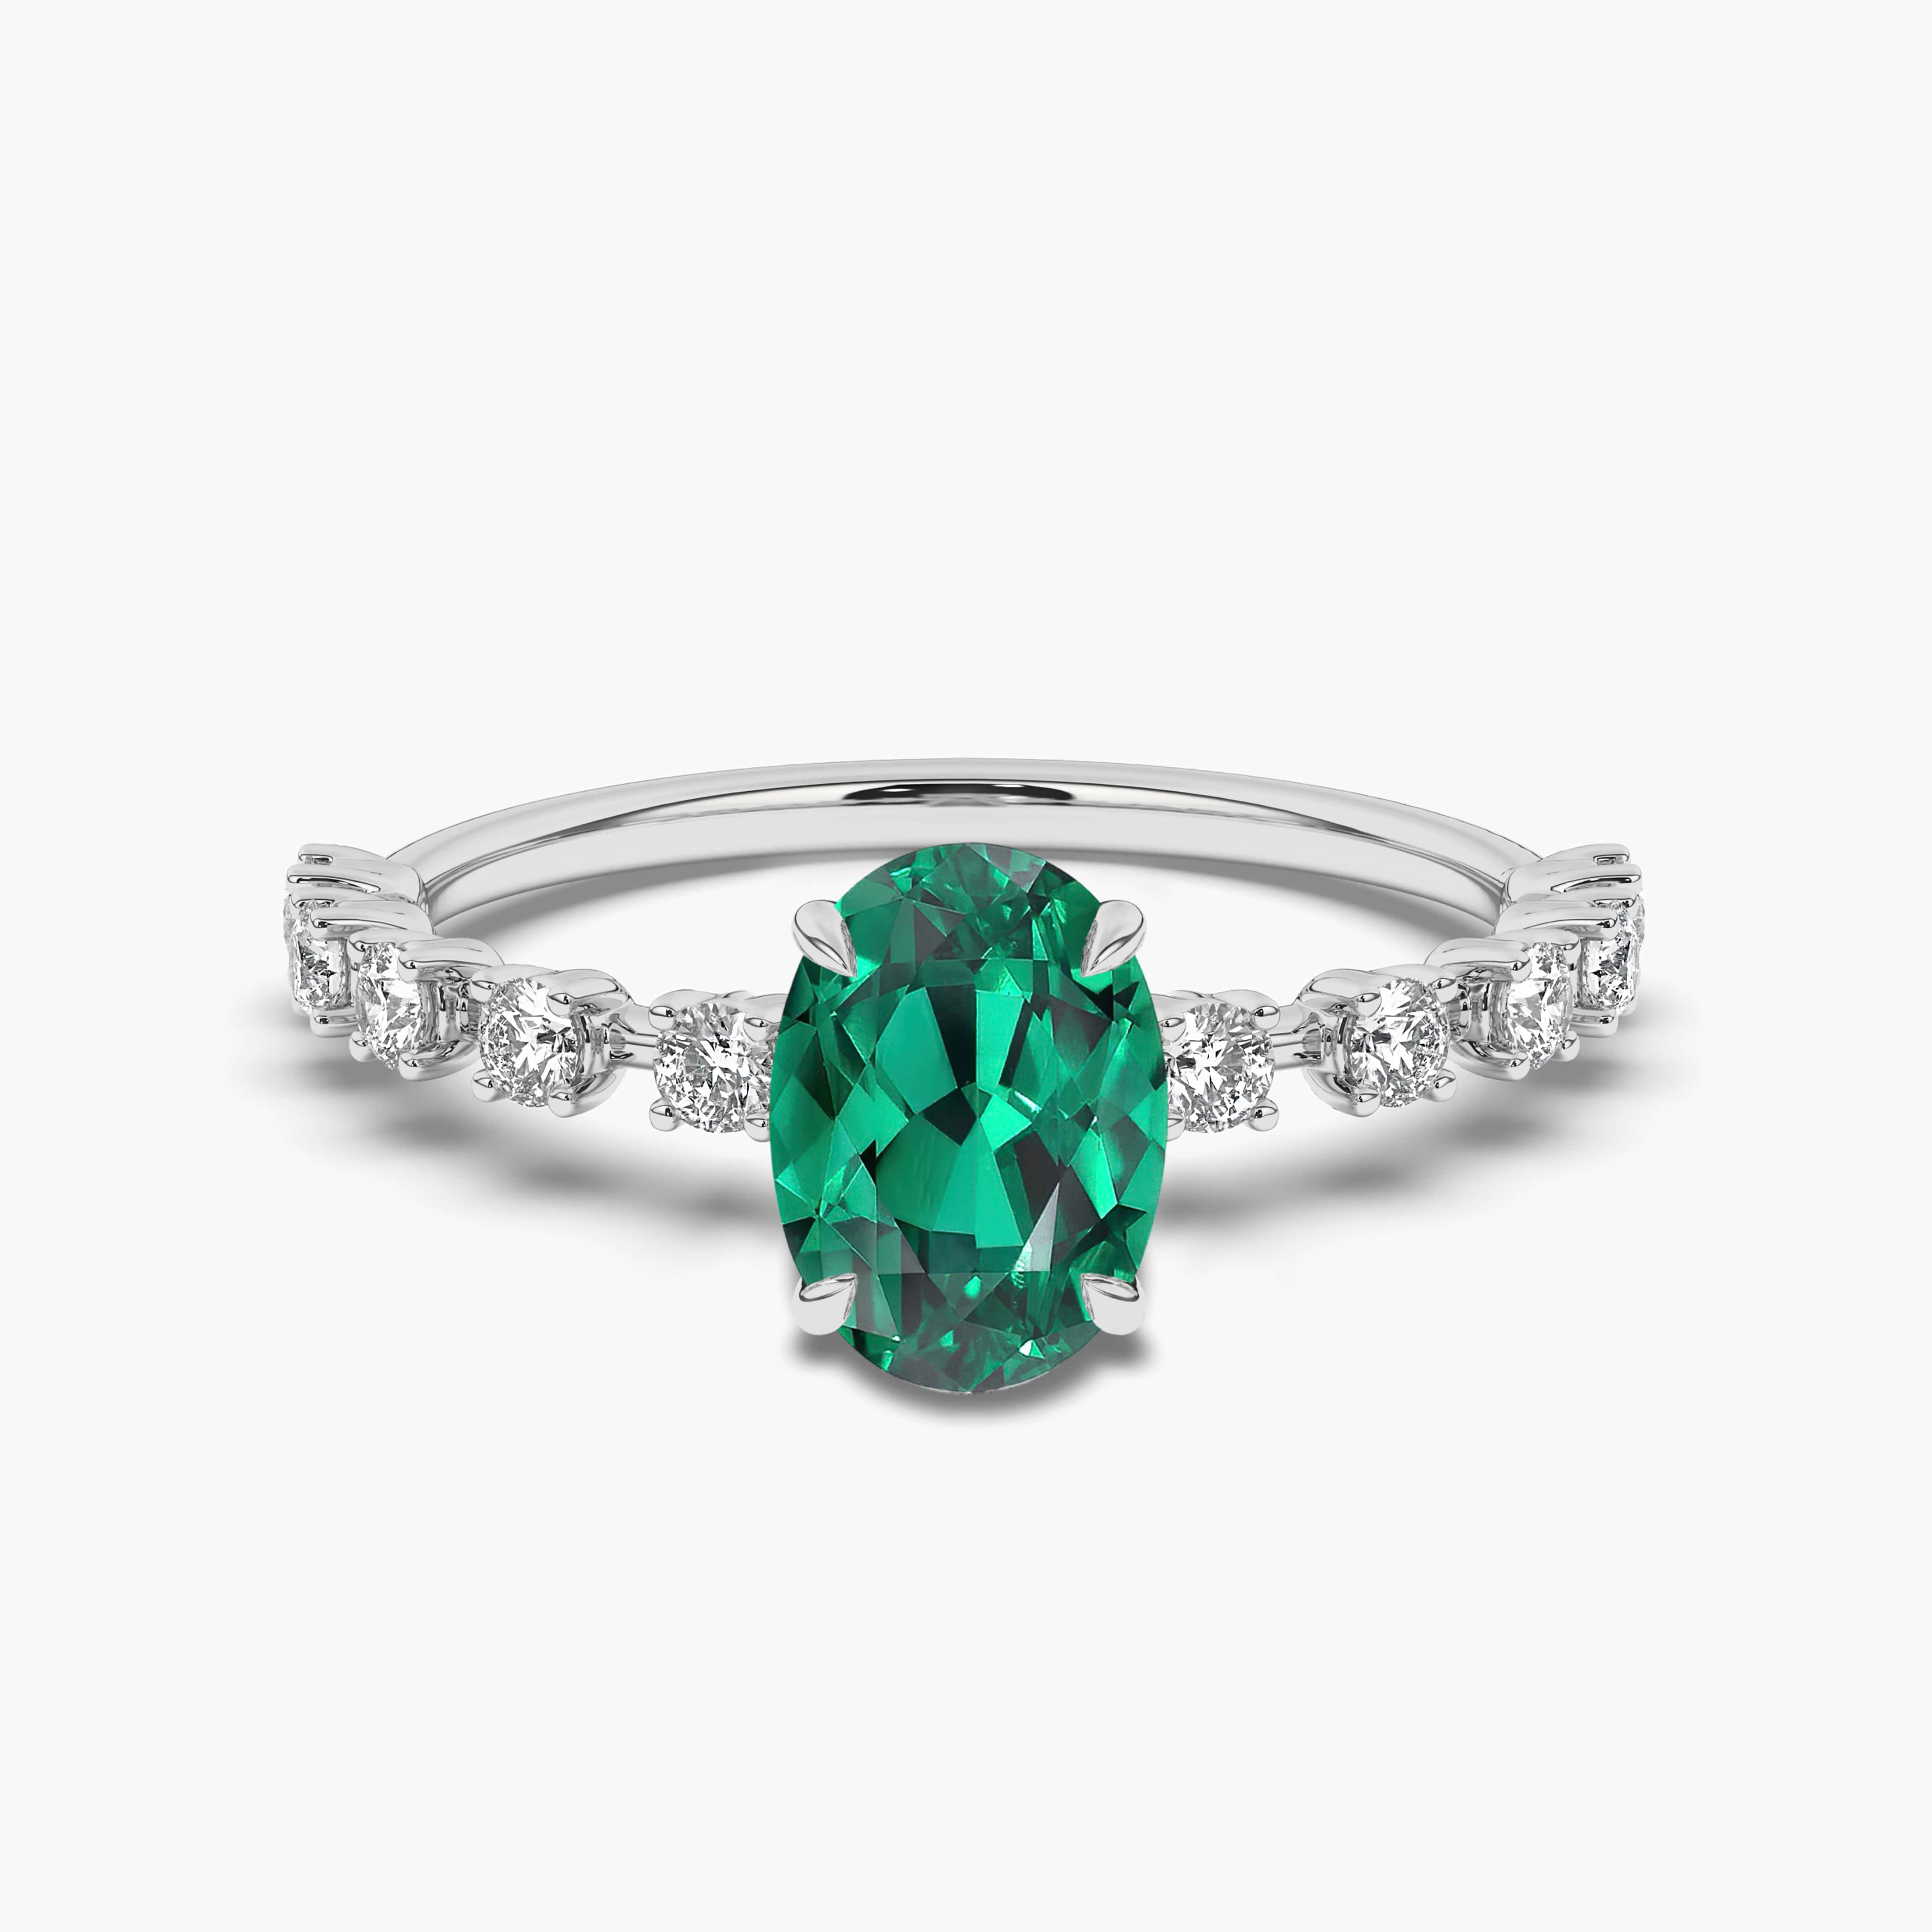 WHITE GOLD OVAL EMERALD AND DIAMOND RING